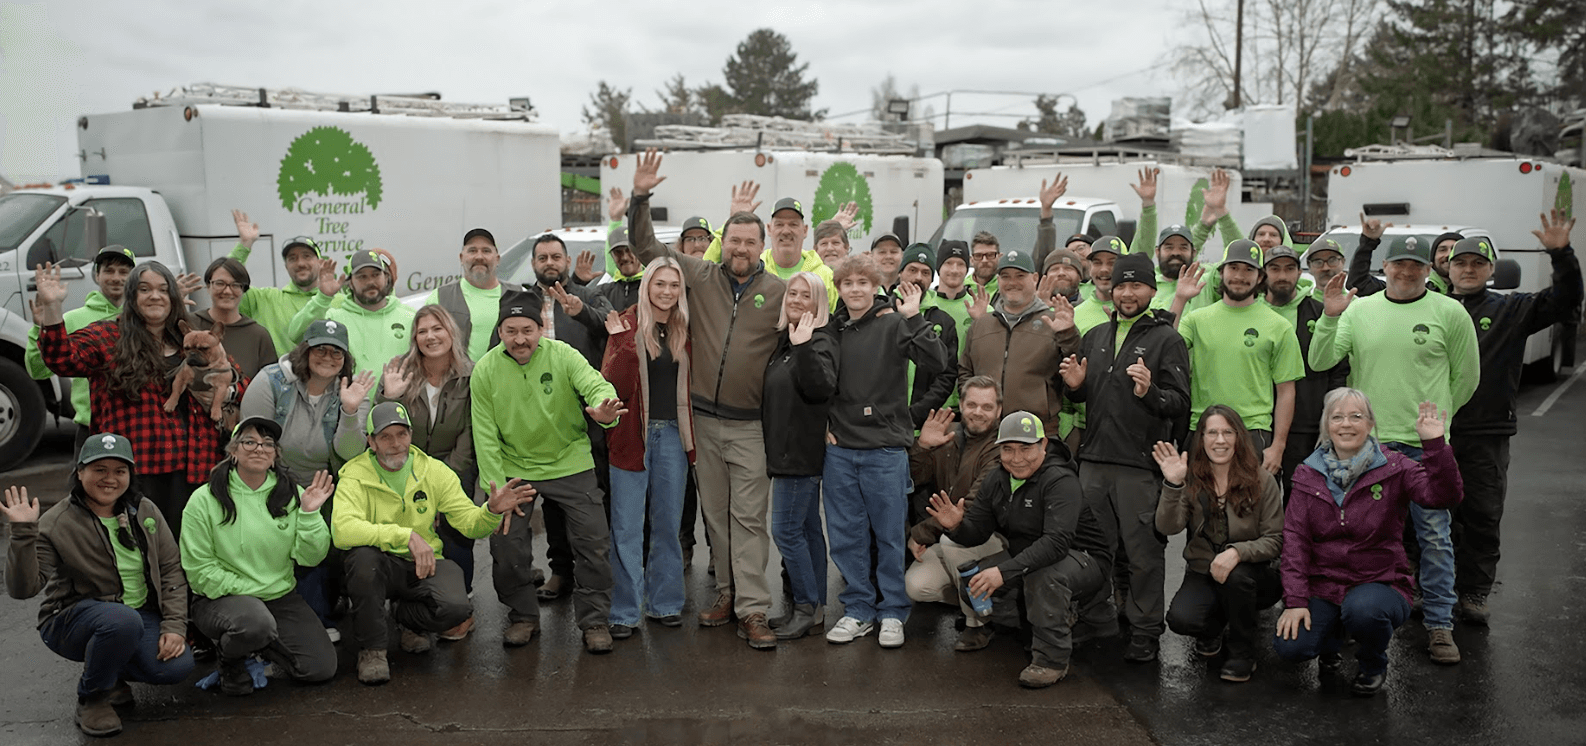 The team at General Tree Service